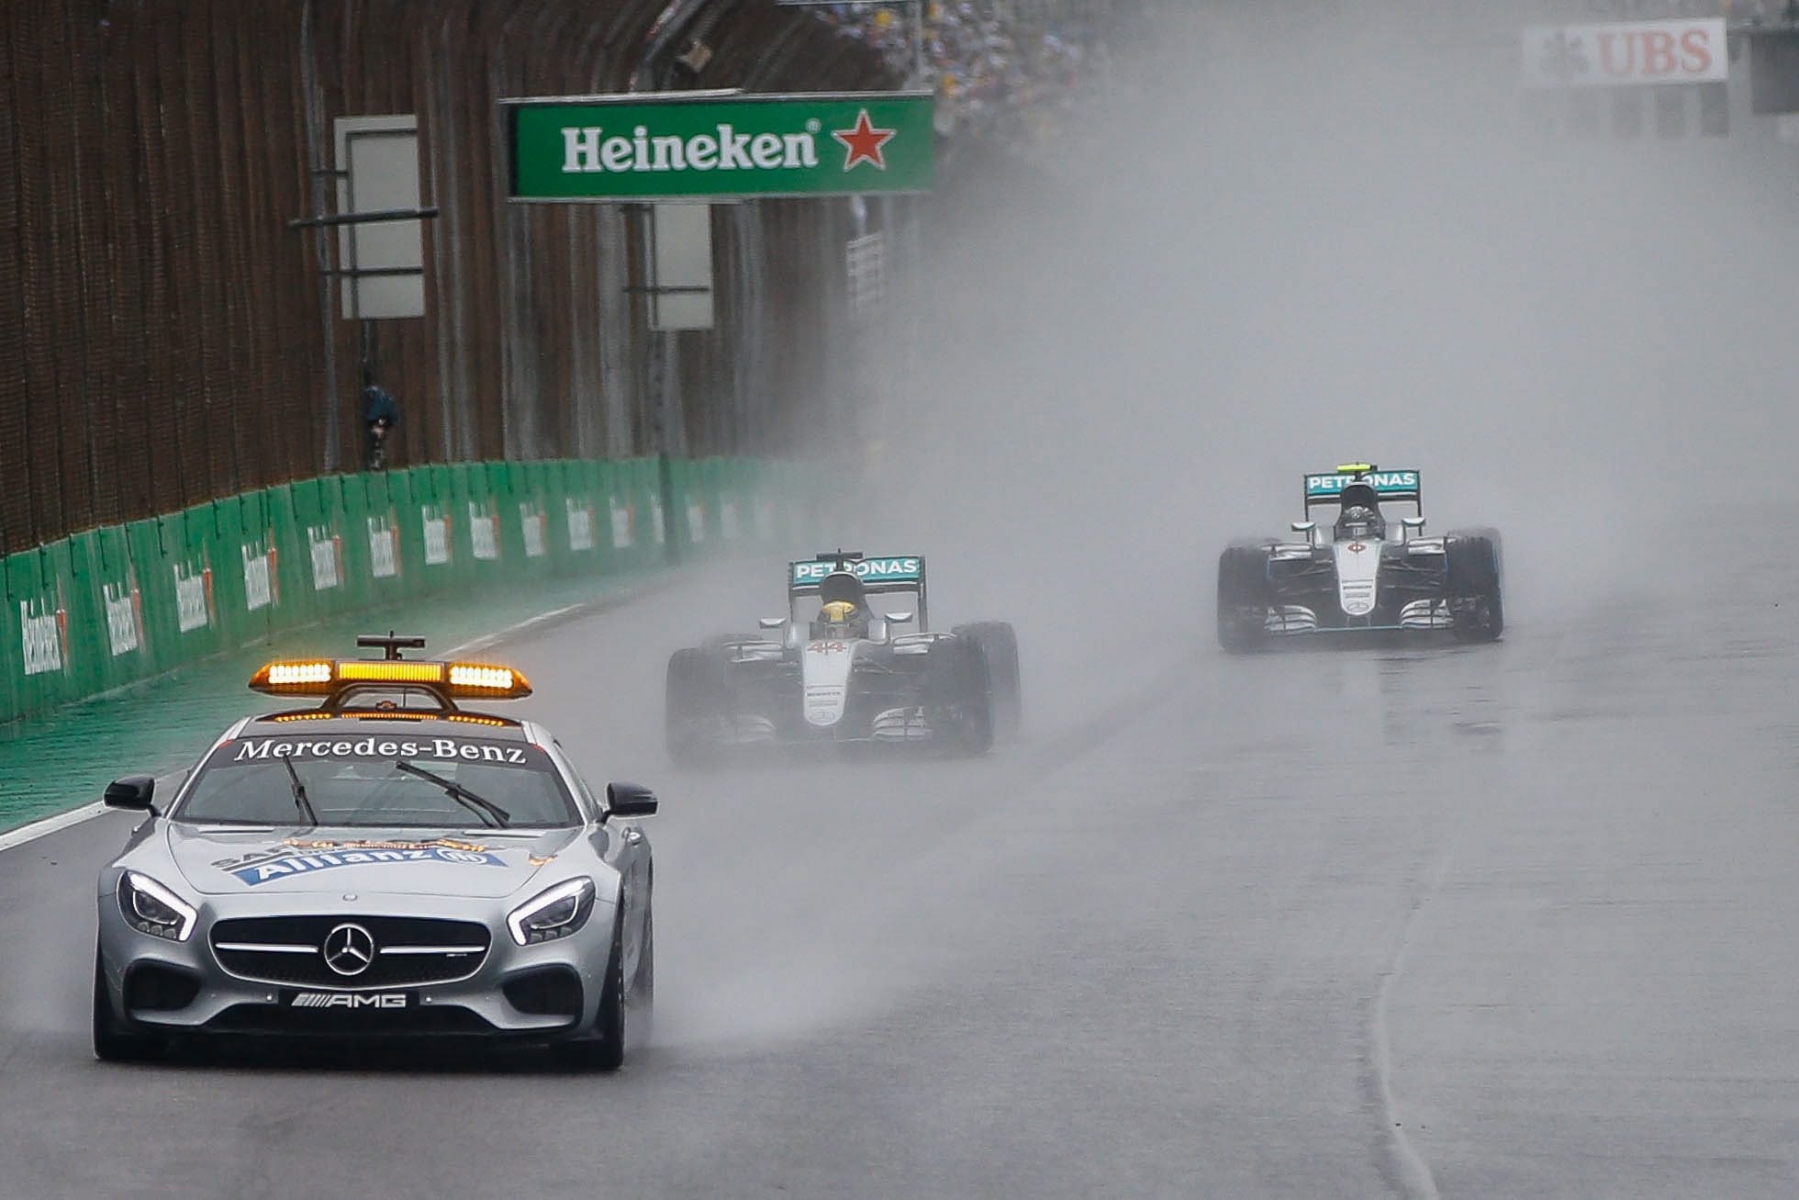 epa05630121 British Formula One driver Lewis Hamilton (C), of Mercedes team, and German Formula One driver Nico Rosberg (R), of Mercedes team in action behind the safety car during the Formula One Grand Prix of Brazil, at Interlagos race track in Sao Paulo, Brazil, 13 November 2016.  EPA/FERNANDO BIZERRA JR. BRAZIL FORMULA ONE GRAND PRIX